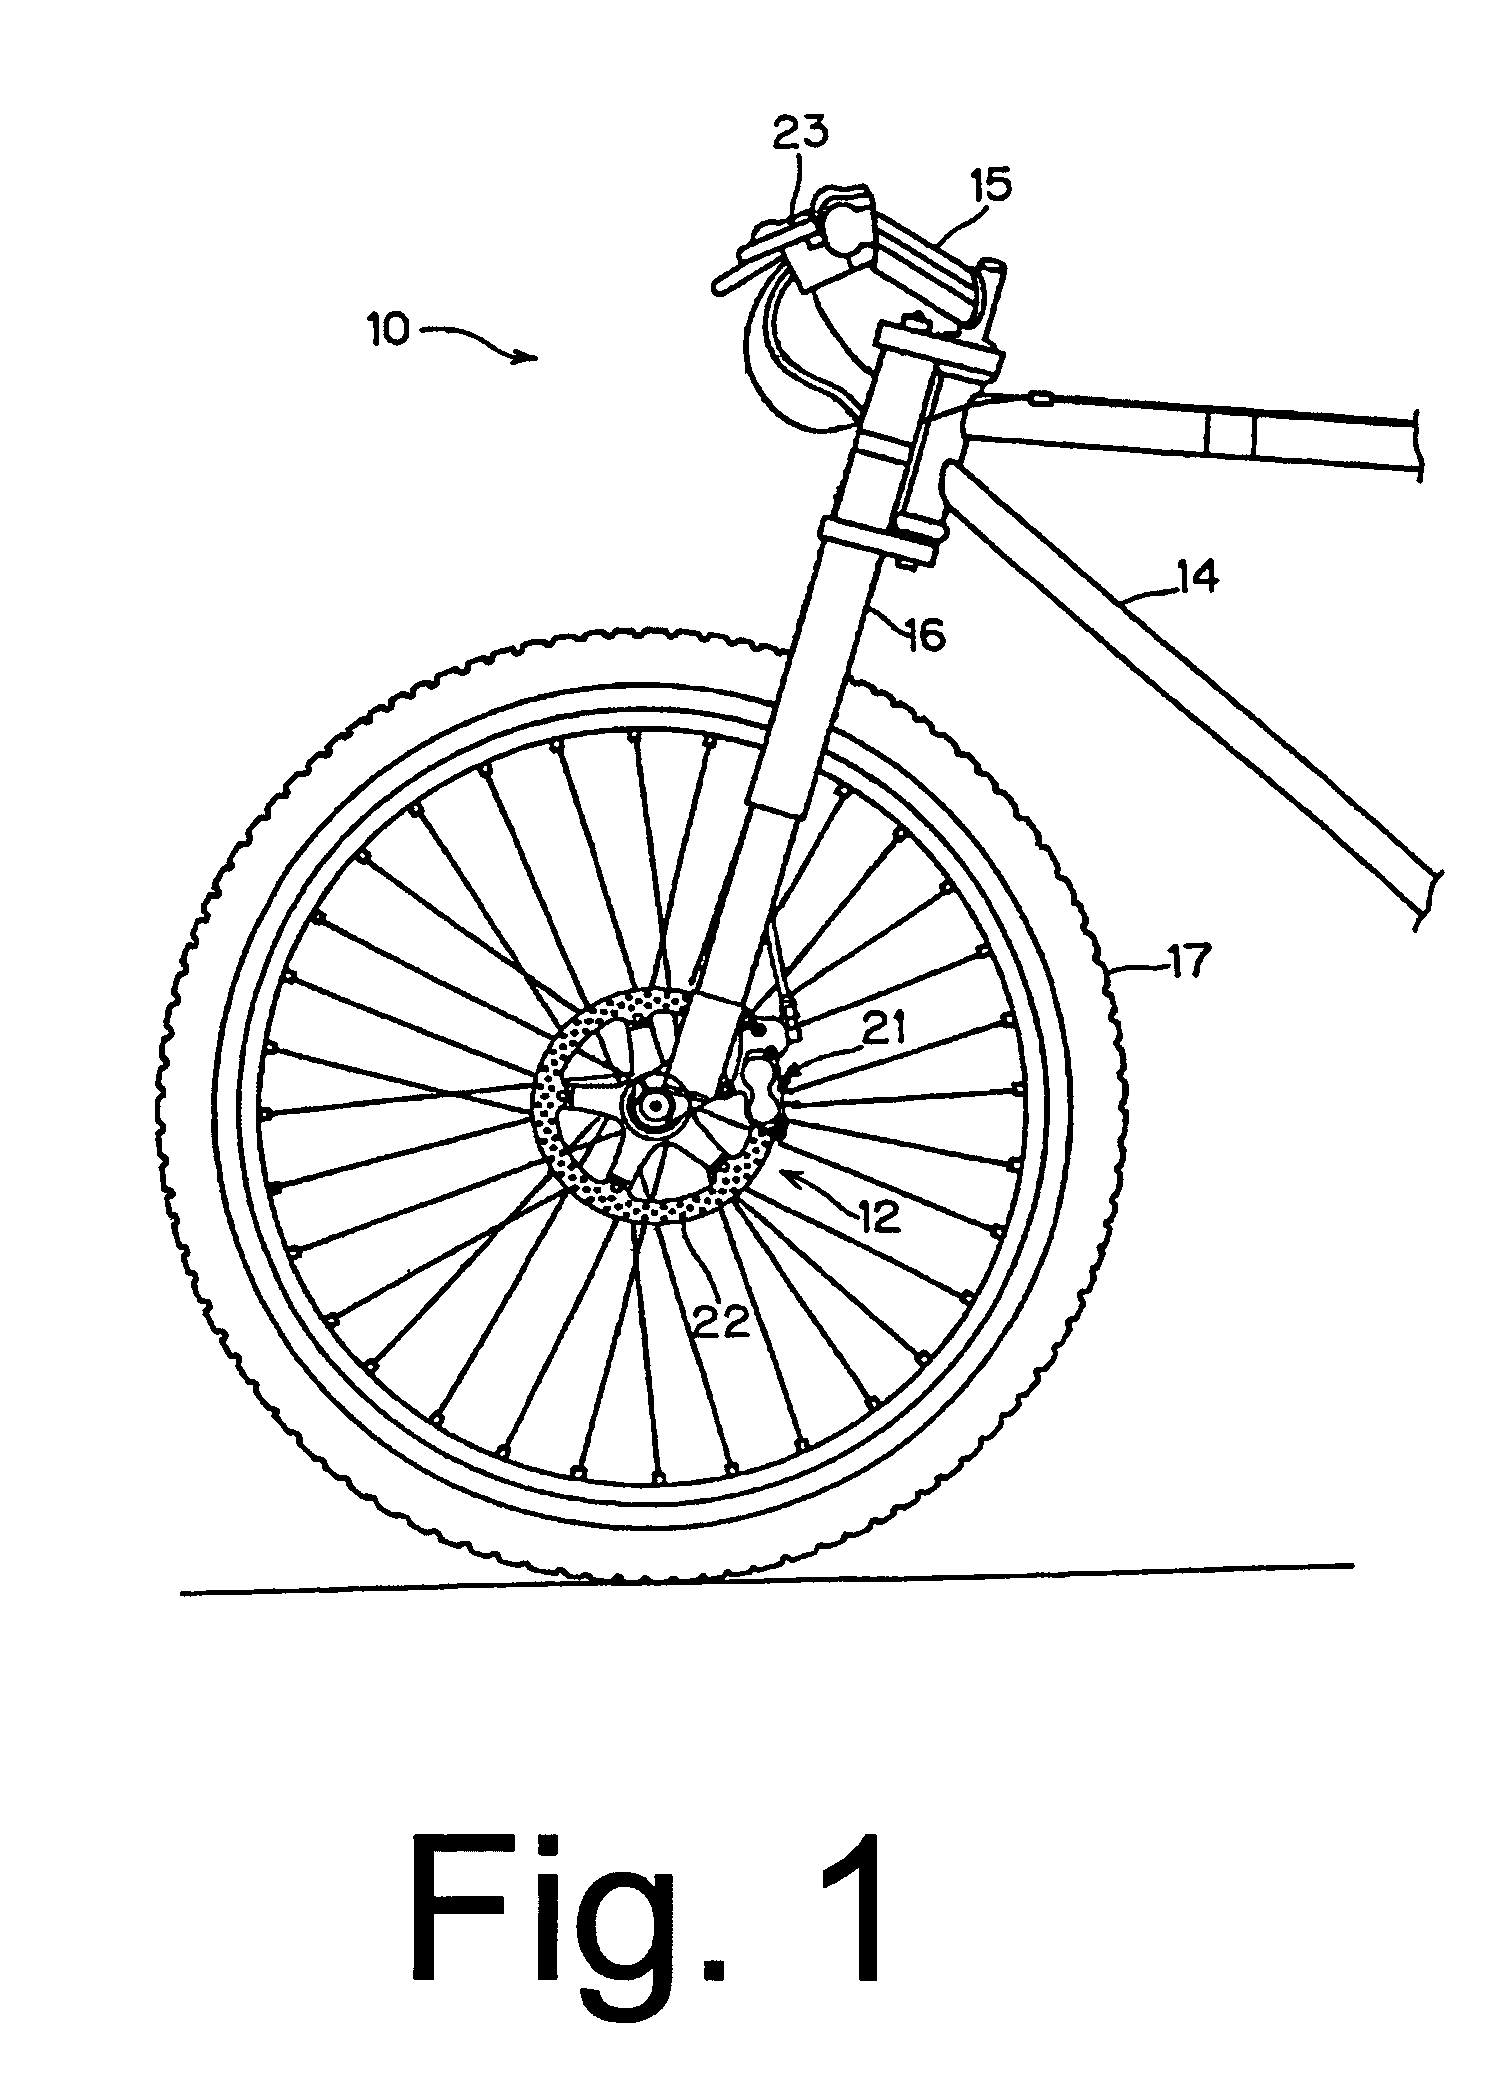 Bicycle disk brake apparatus with laminated components